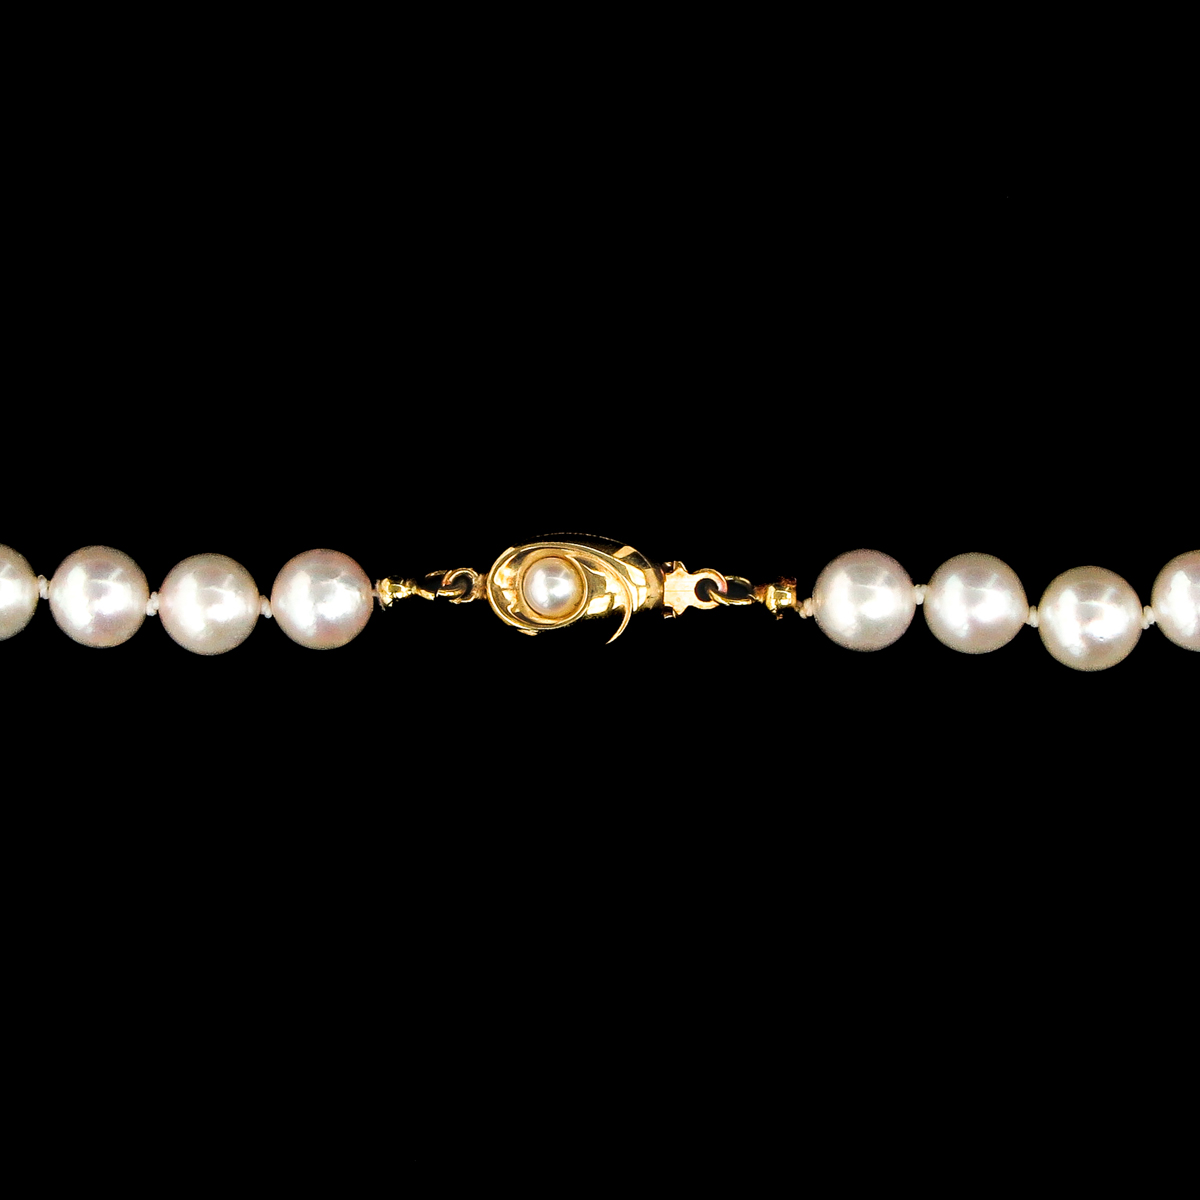 A Collection of 4 Pearl Necklaces - Image 3 of 10